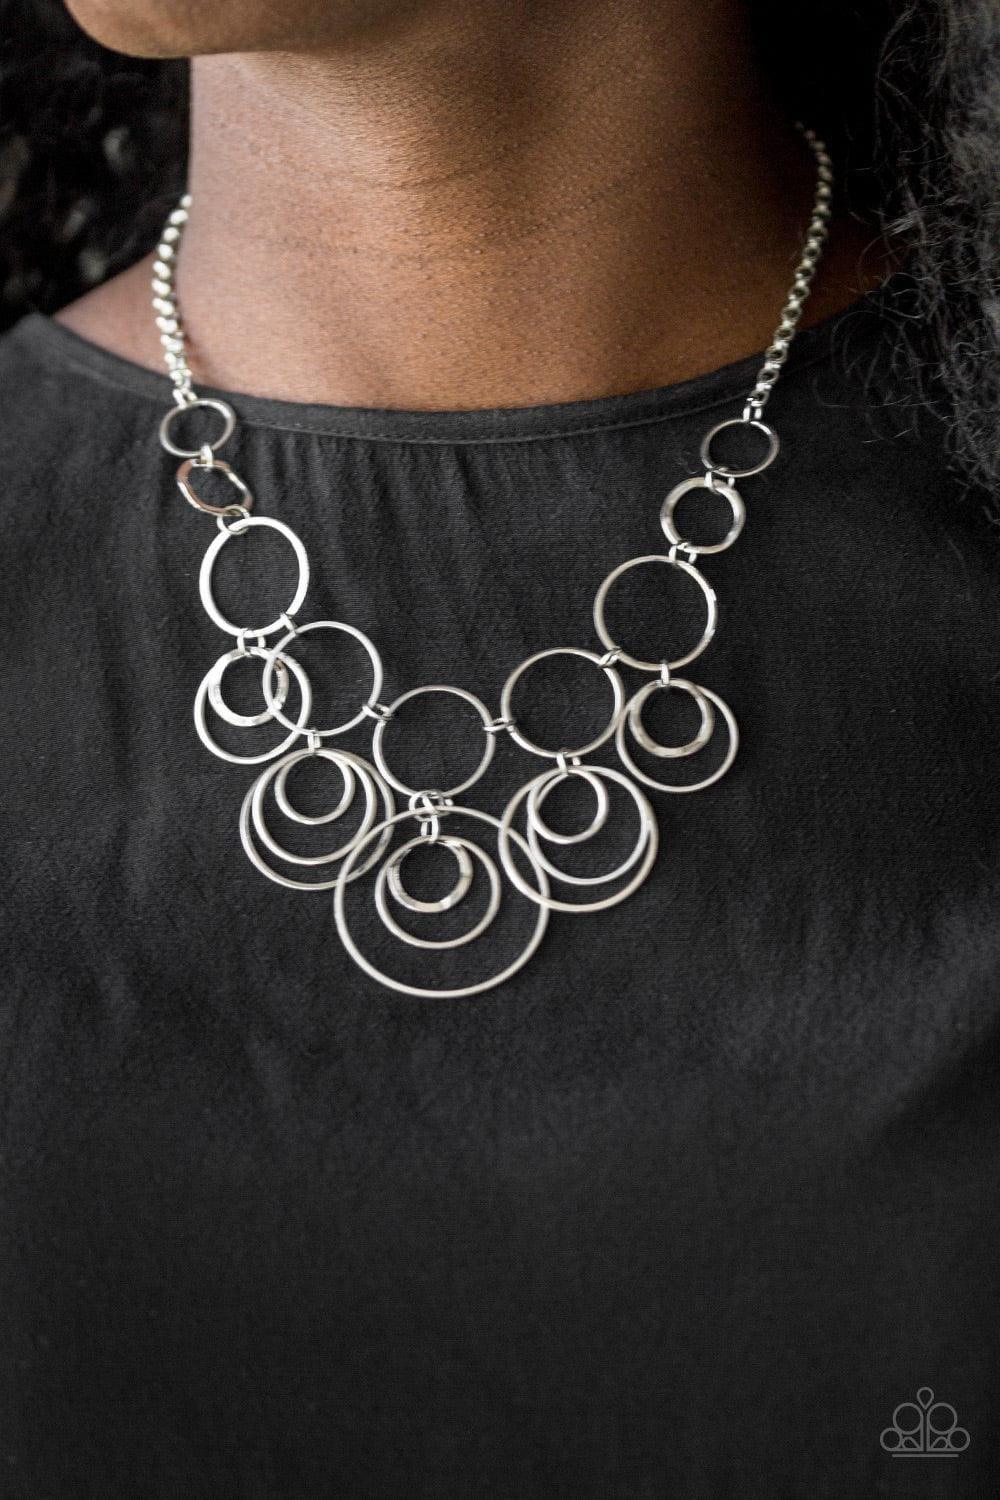 Paparazzi Accessories - Break The Cycle - Silver Necklace - Bling by JessieK